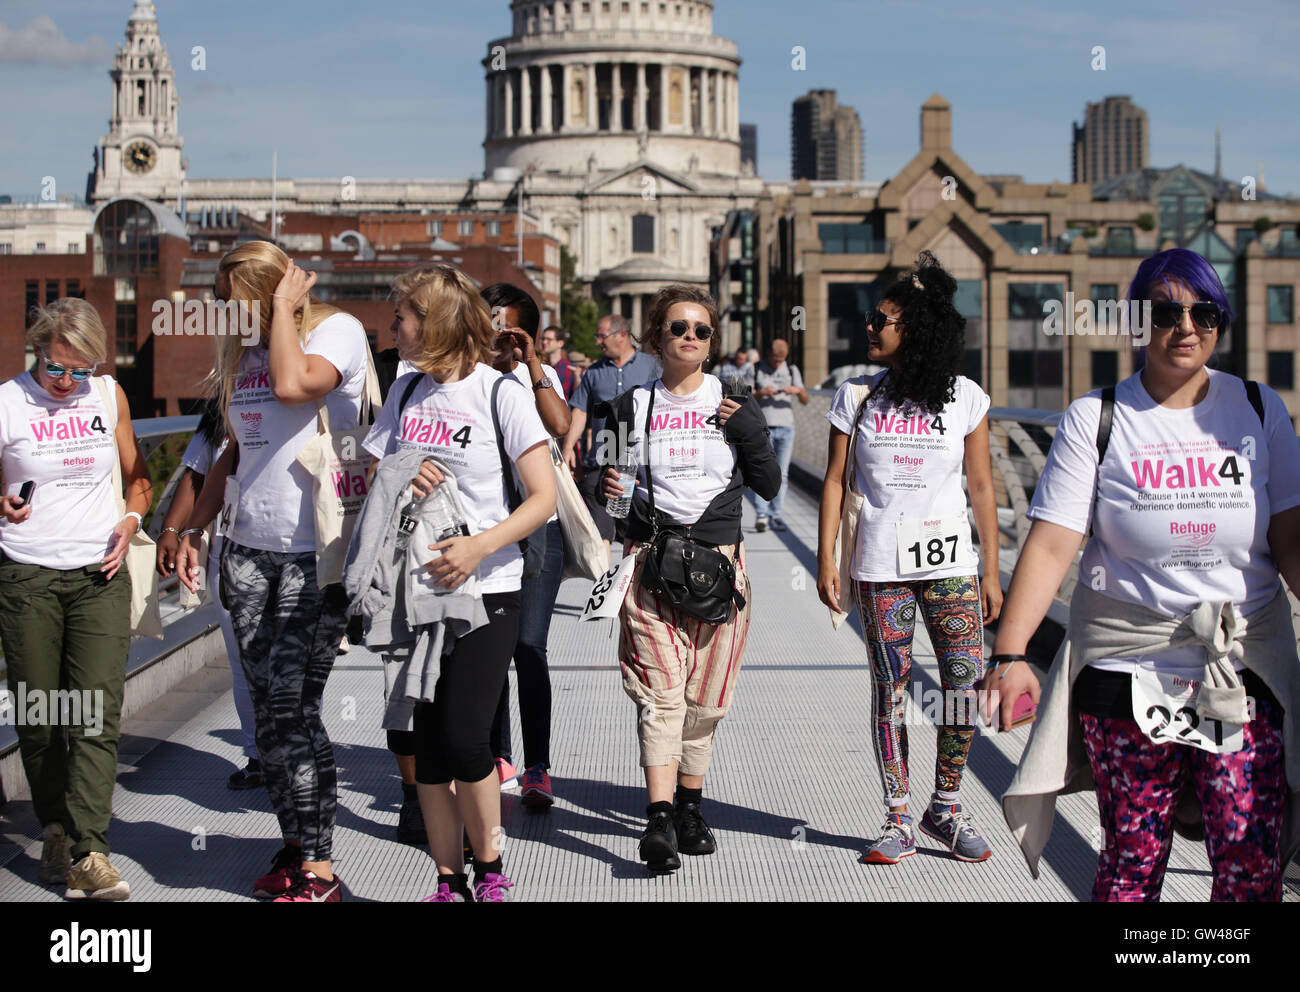 Helena Bonham Carter (centre) joins survivors and supporters walking across Millennium Bridge, London, during Refuge's 10km walk to raise funds for the domestic violence charity. Stock Photo